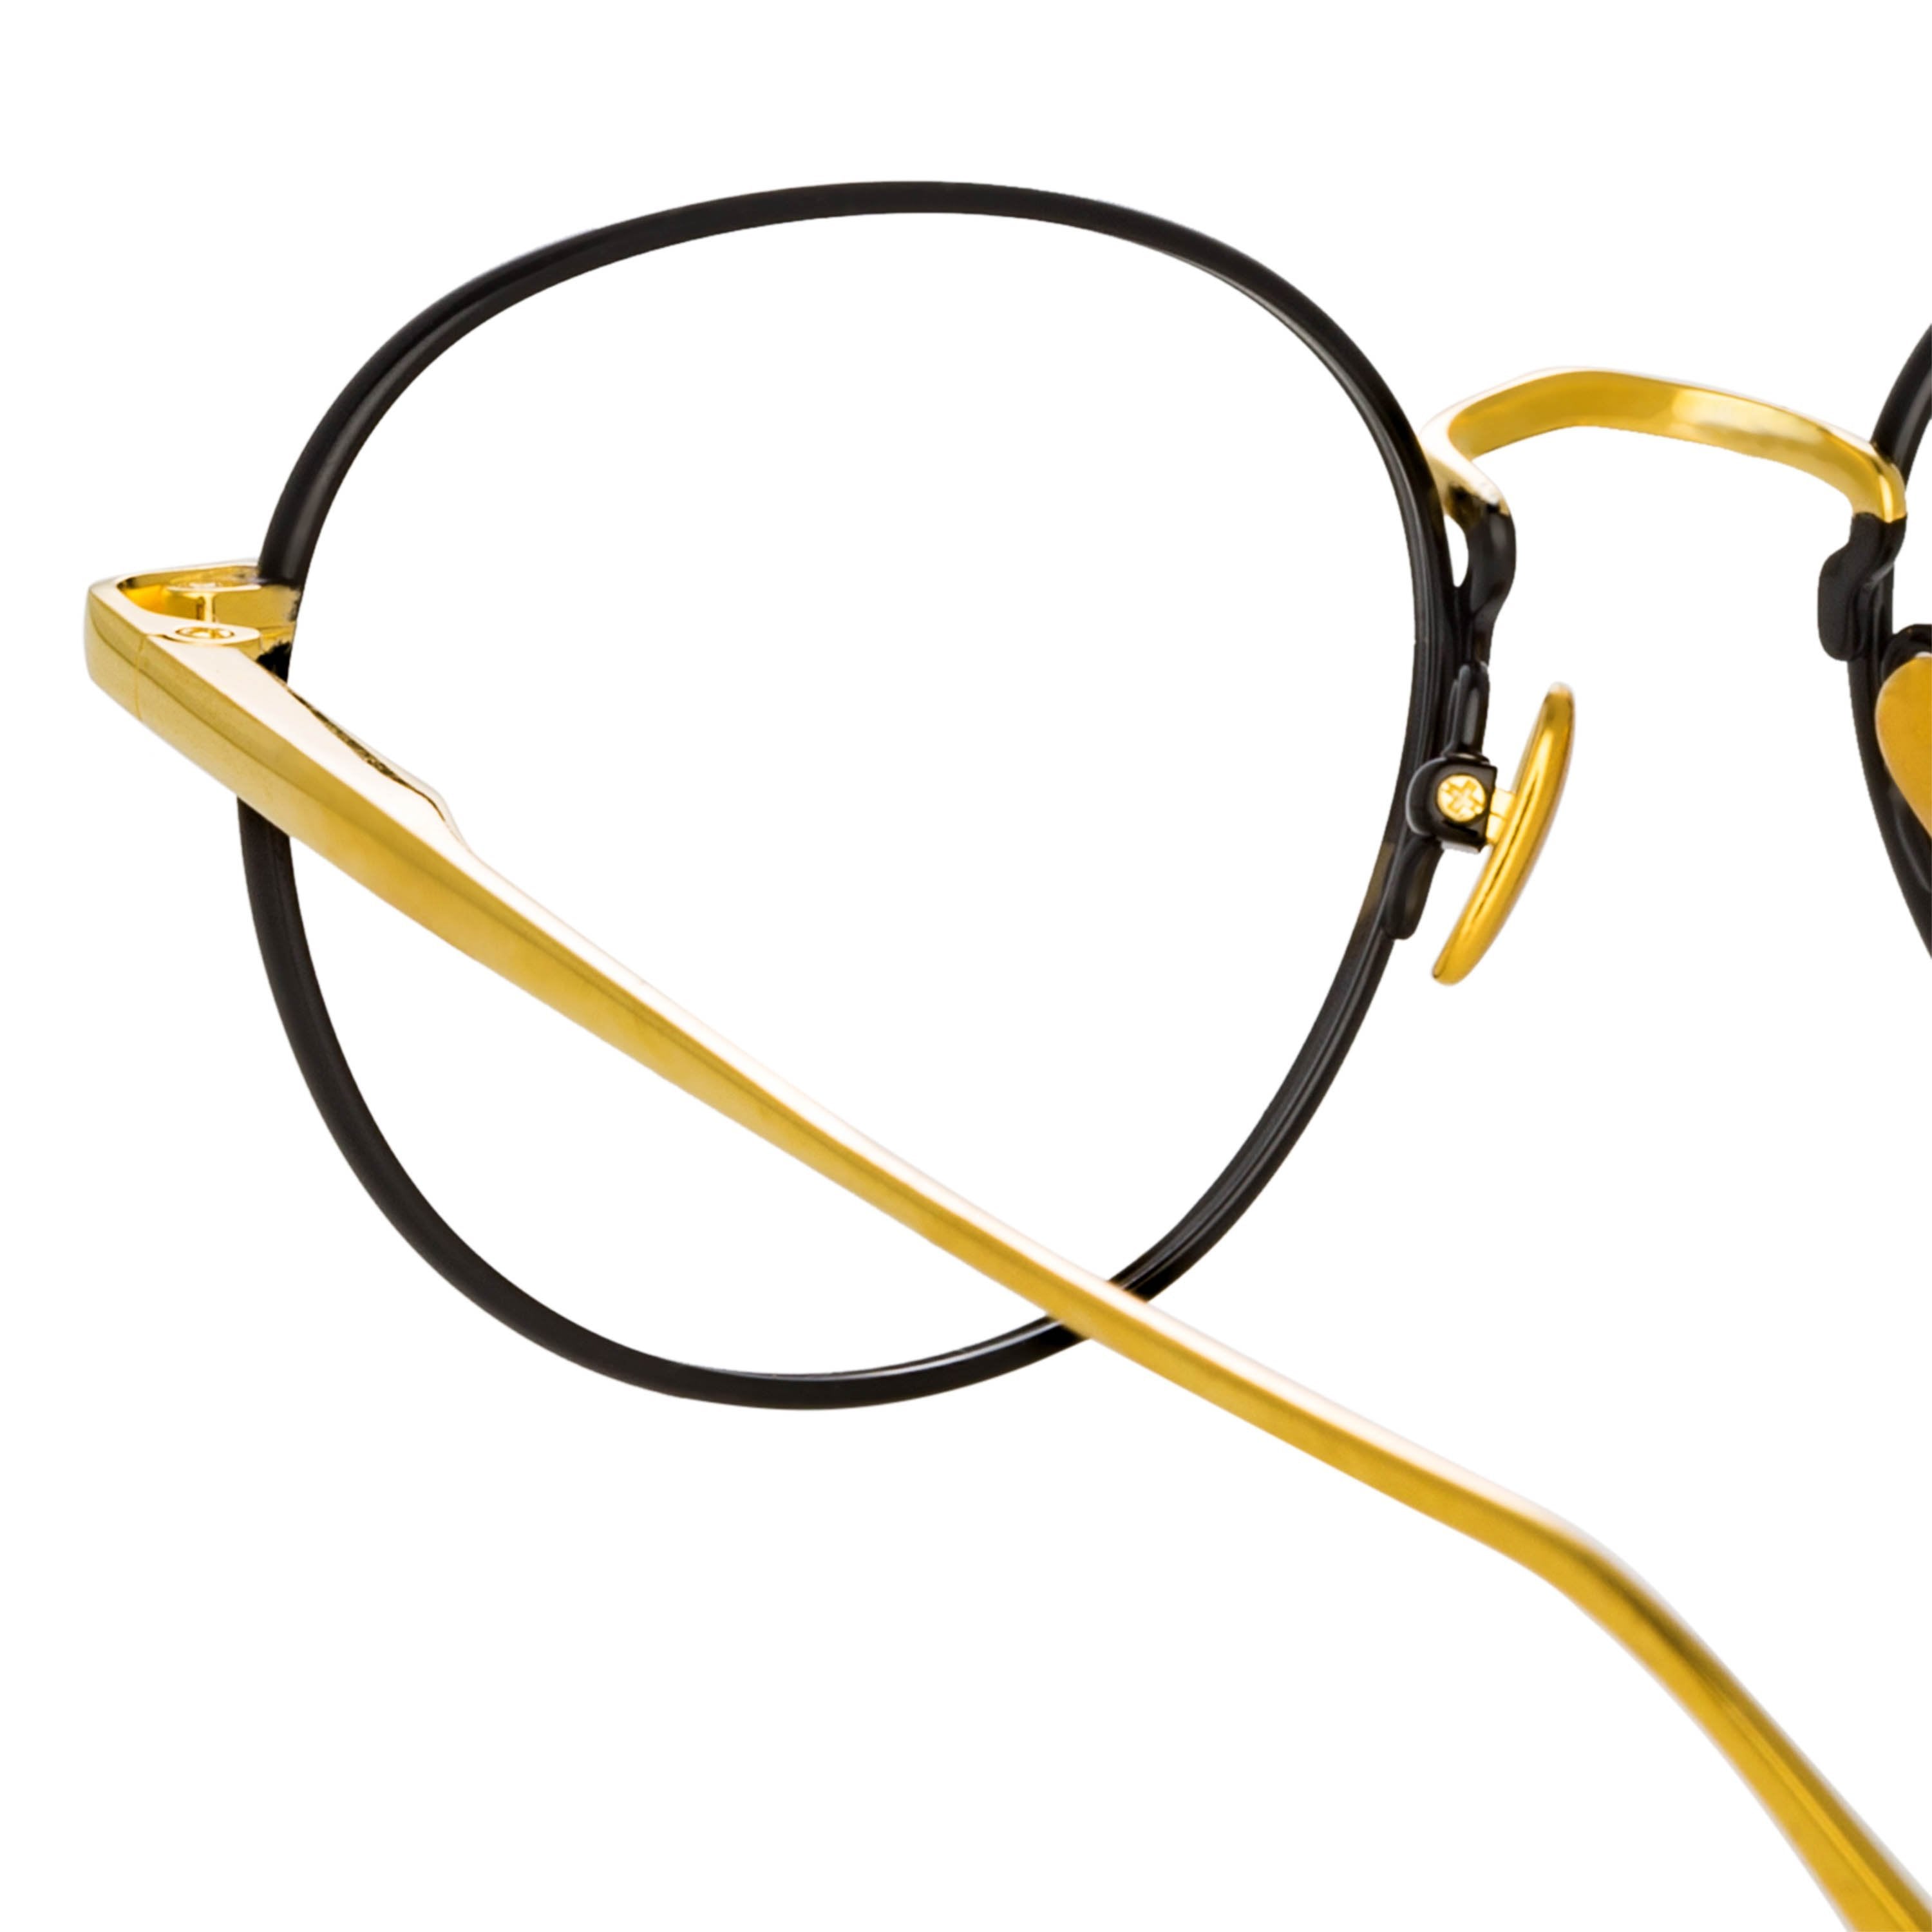 Color_LFL1230C1OPT - Anton Oval Optical Frame in Yellow Gold and Black